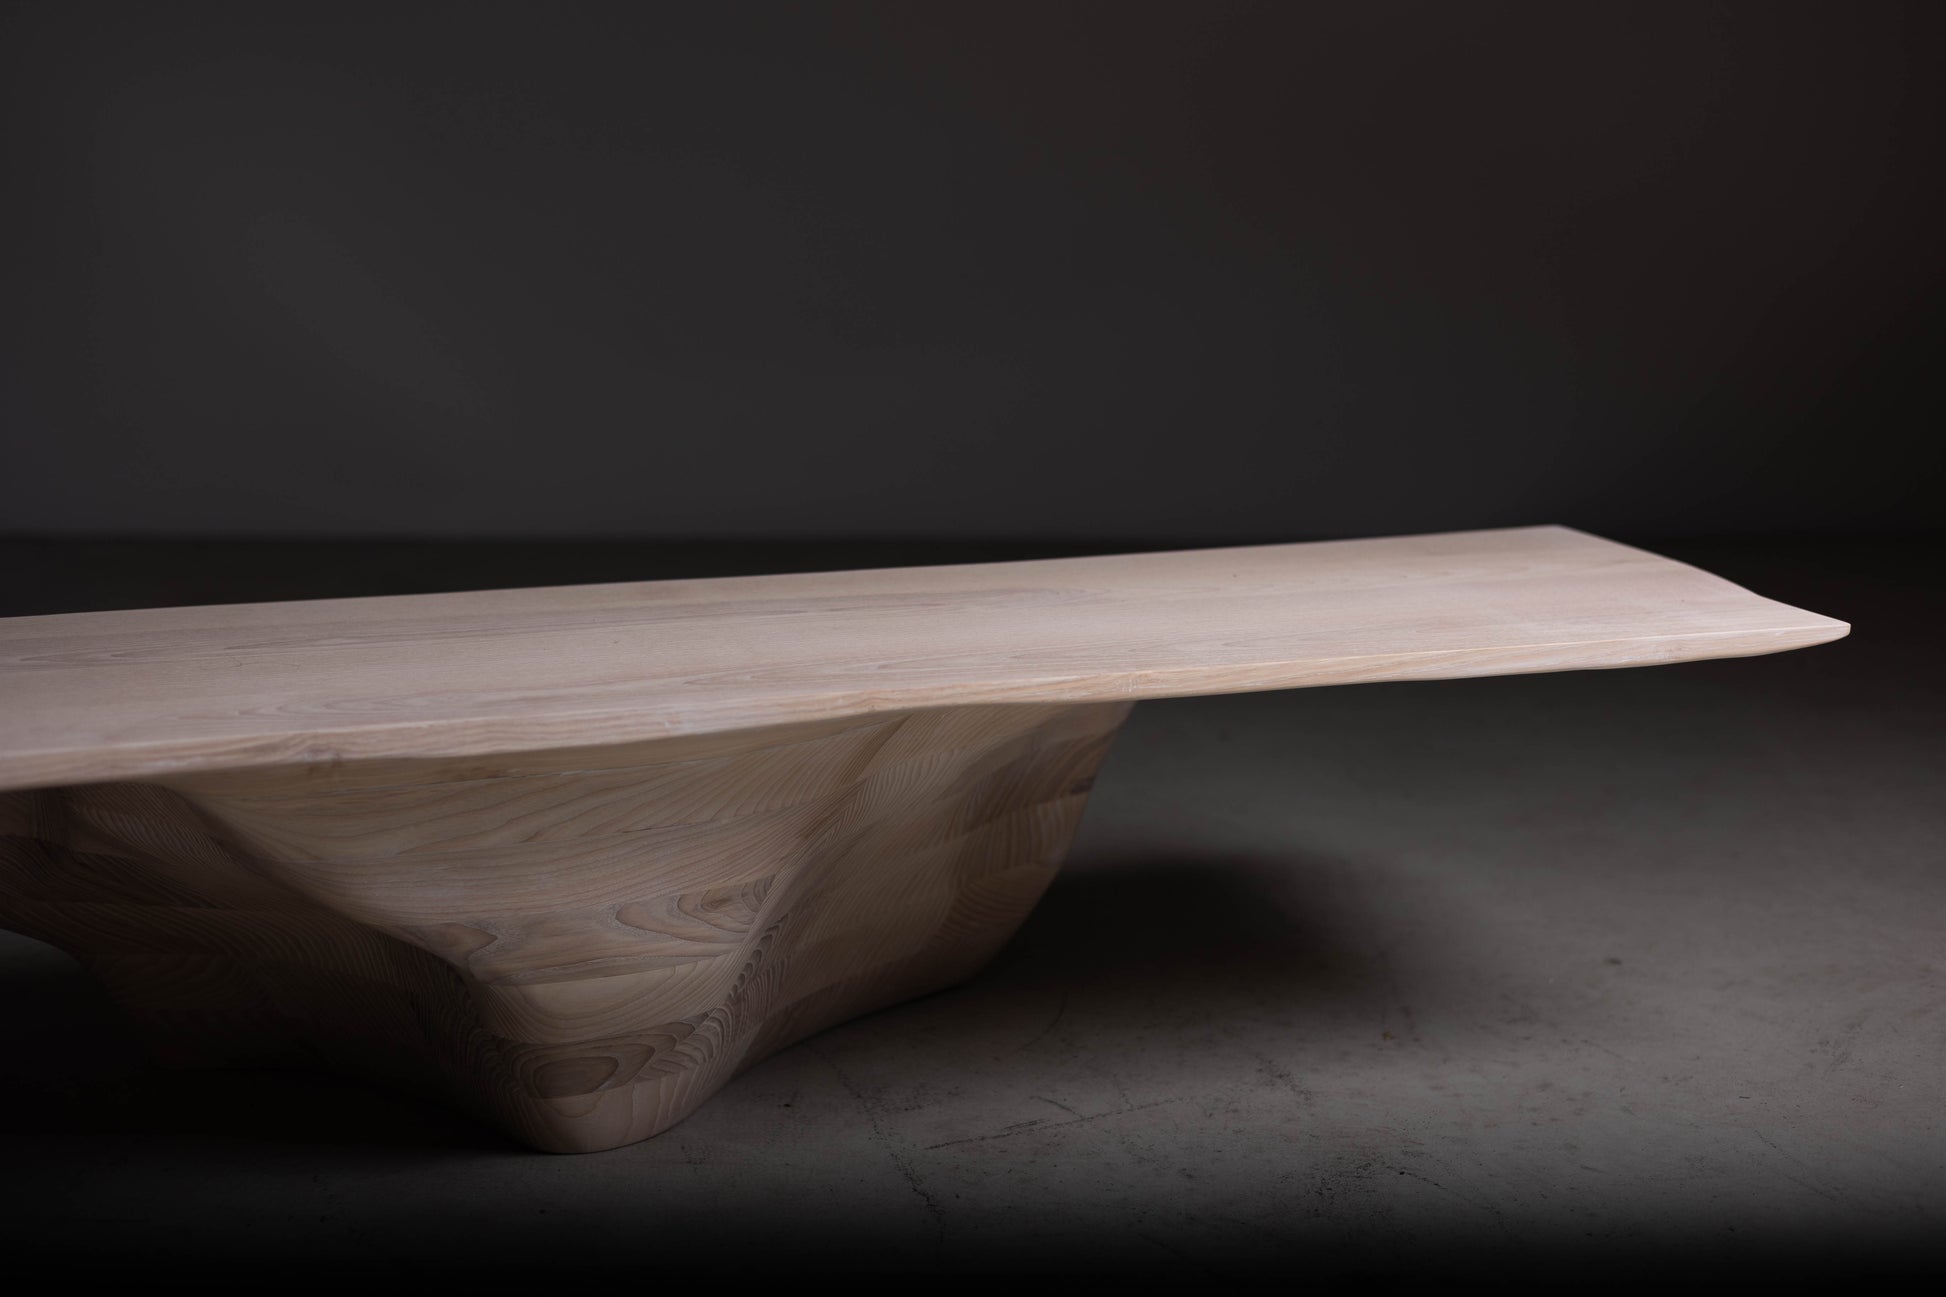 Sculptural Solid Wood Coffee Table EM111 Part Of Erosio Collection | Close-up image showing the fluid edge and sculptural details.